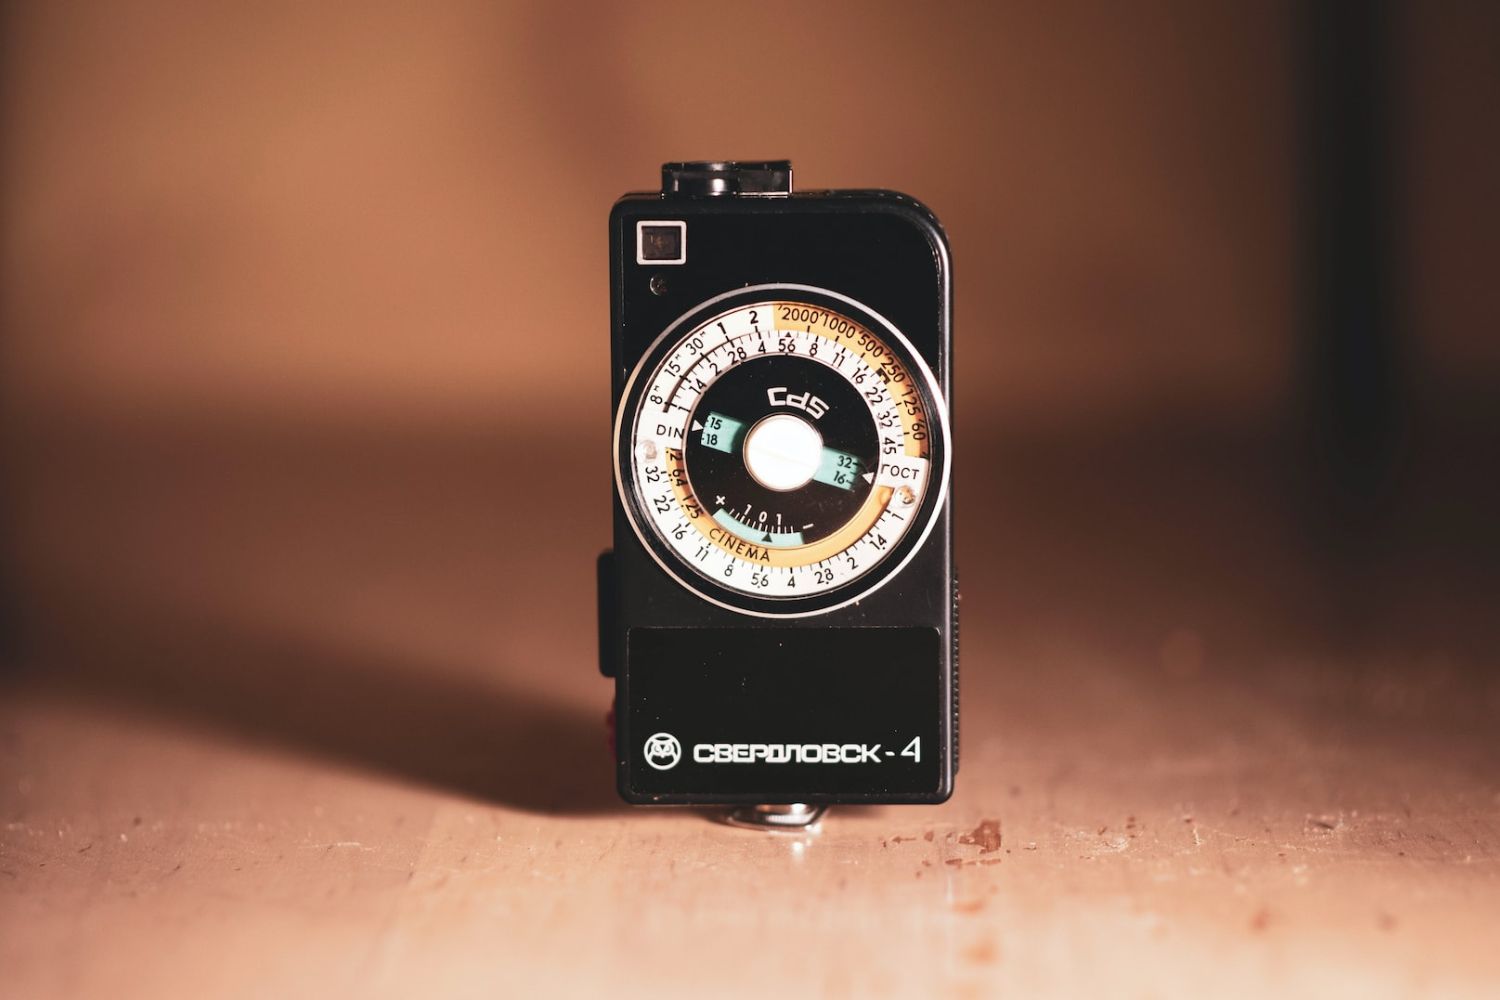 a light meter Photo by Lawrence Aritao on Unsplash